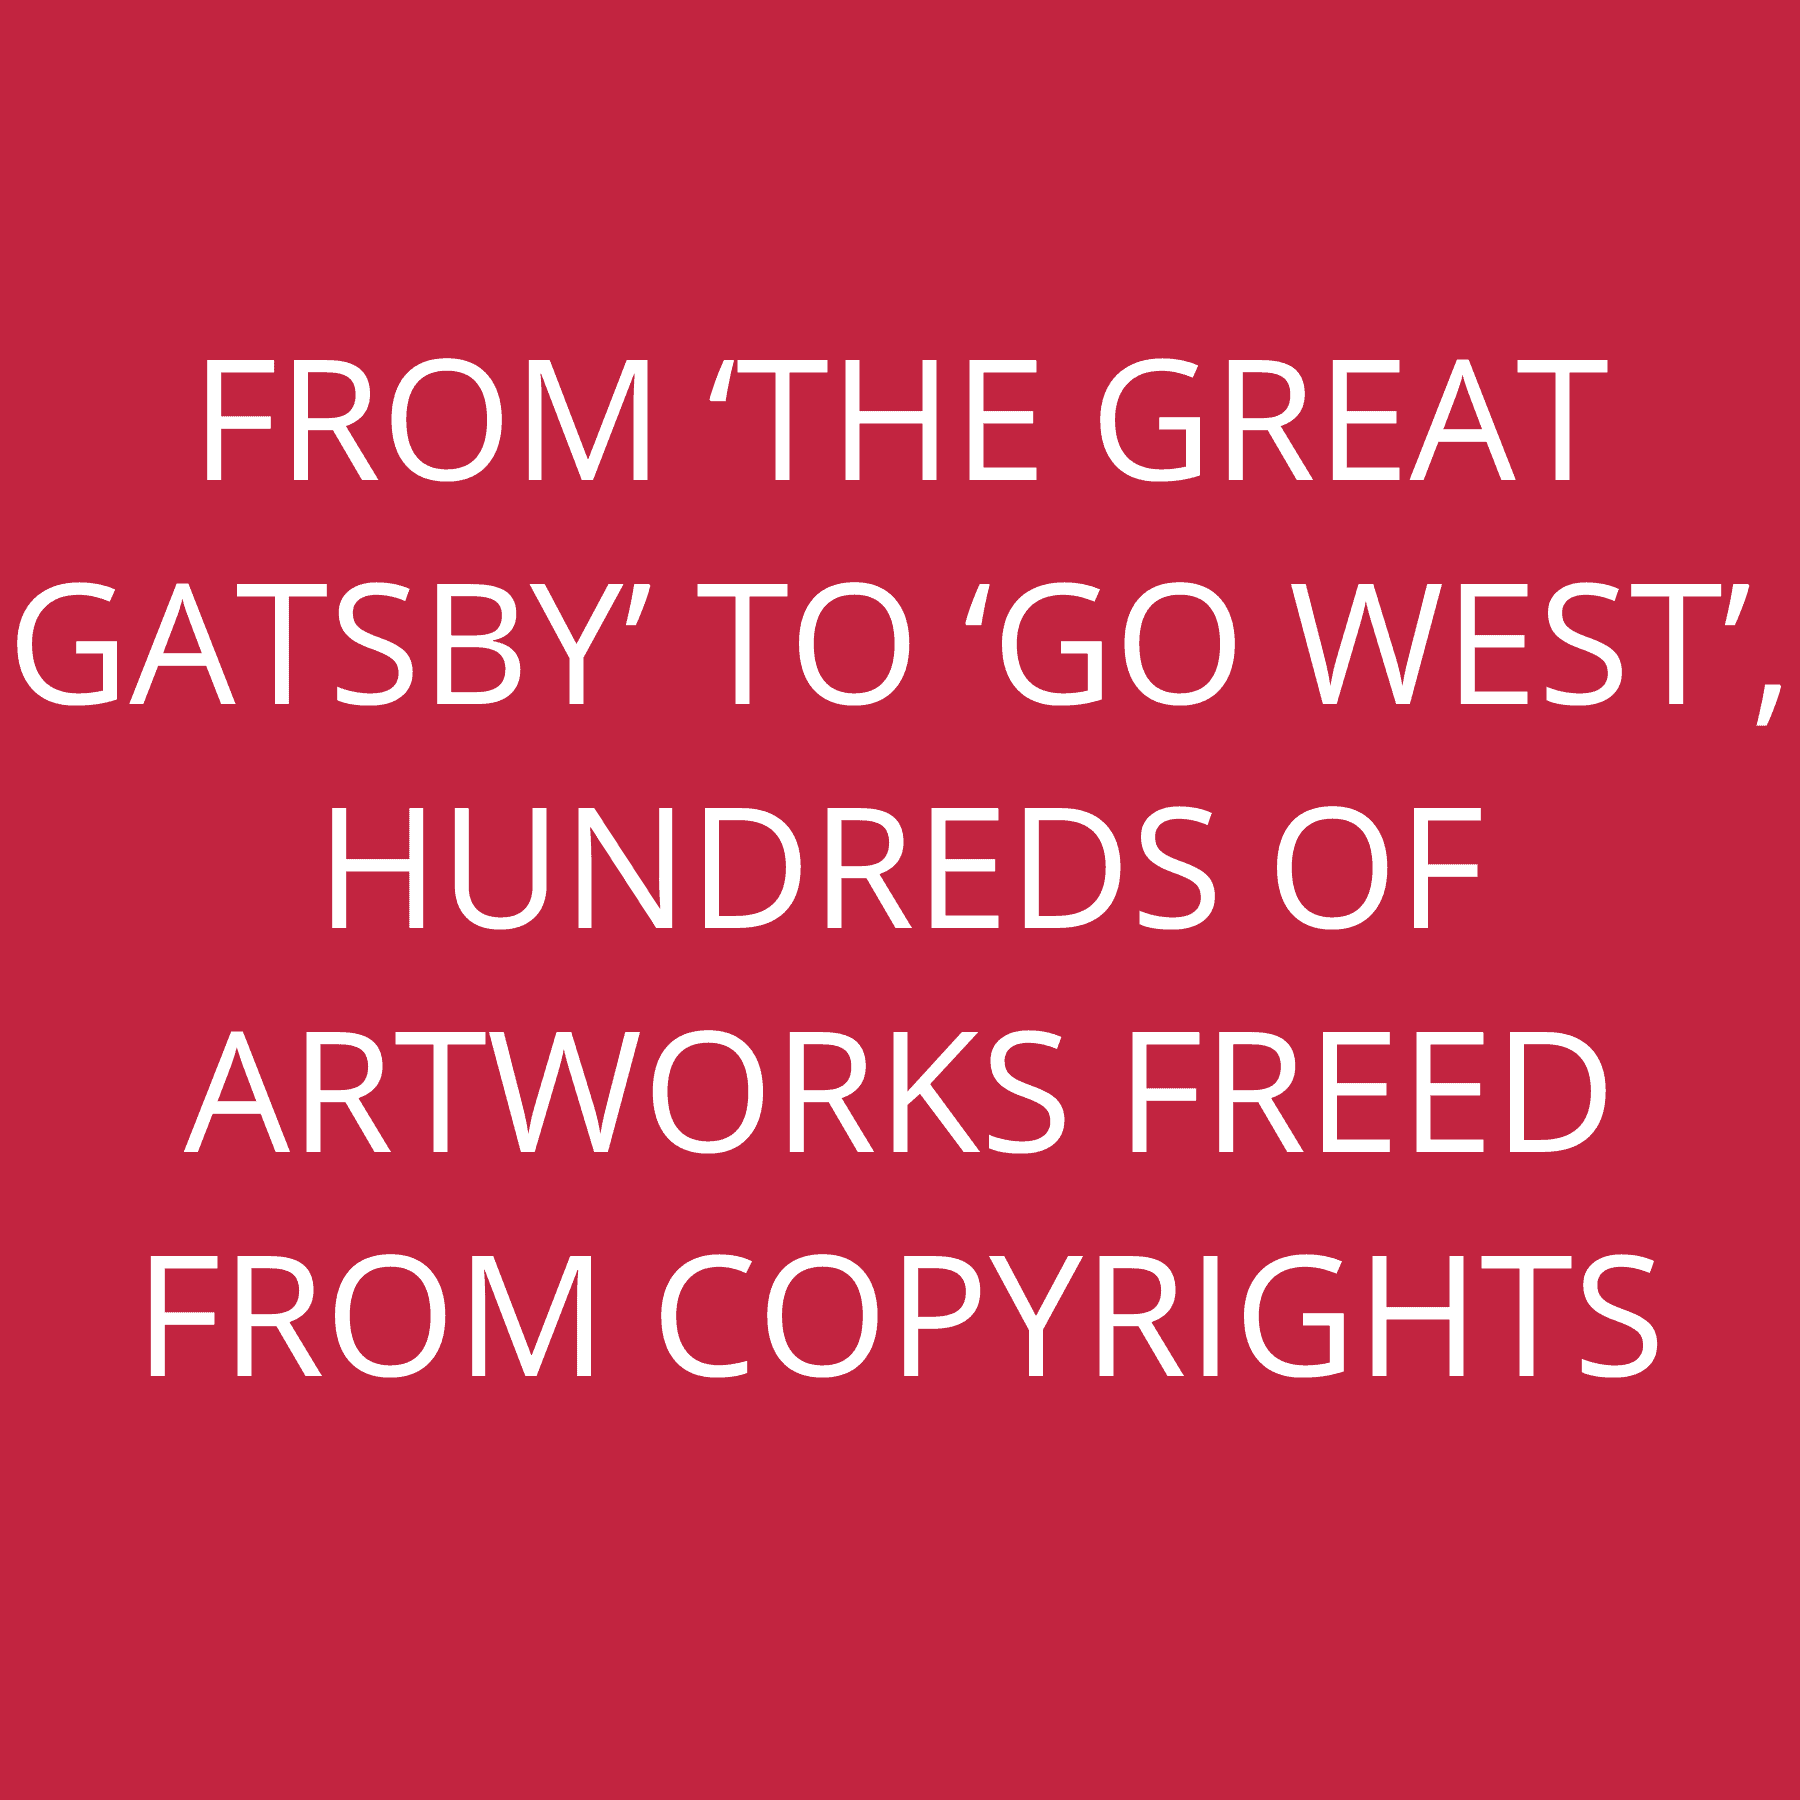 From ‘THE GREAT GATSBY’ to ‘GO WEST’, hundreds of artworks freed from copyrights